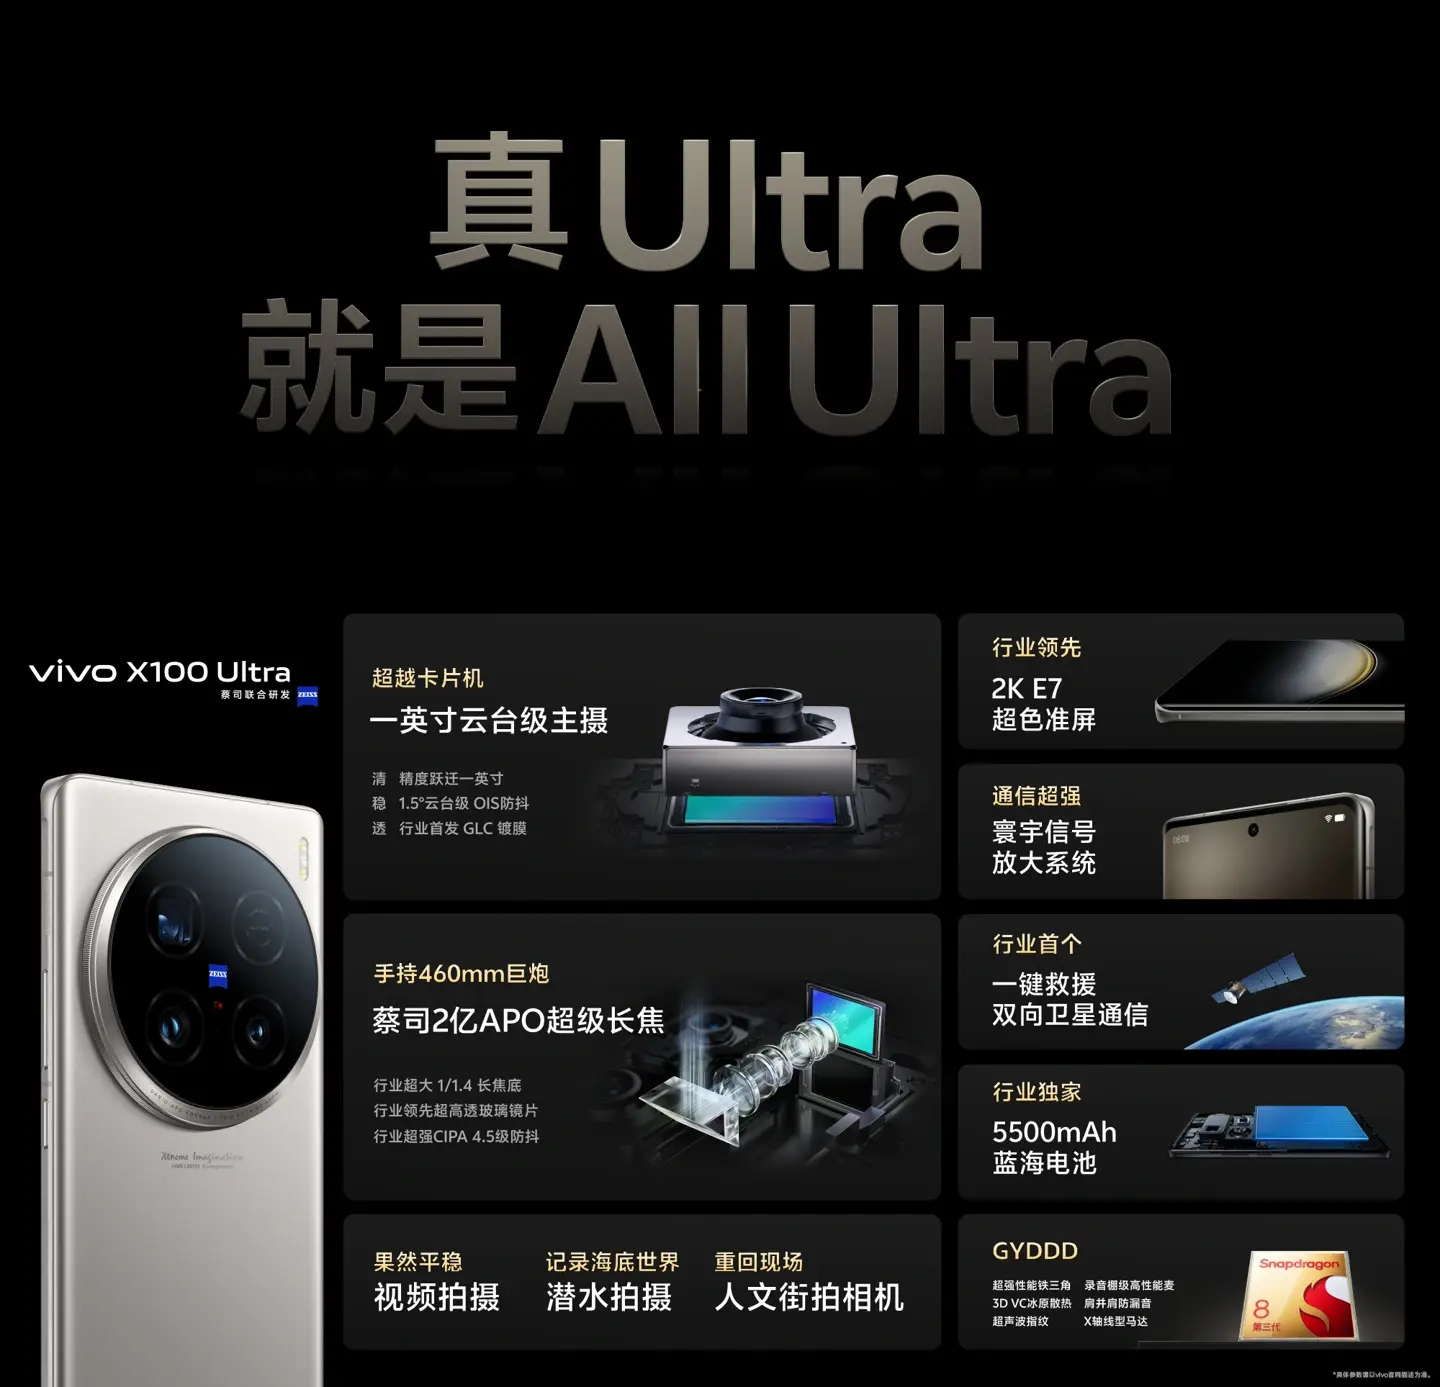 Vivo X100 Ultra Launched: Ultimate Camera Experience, 